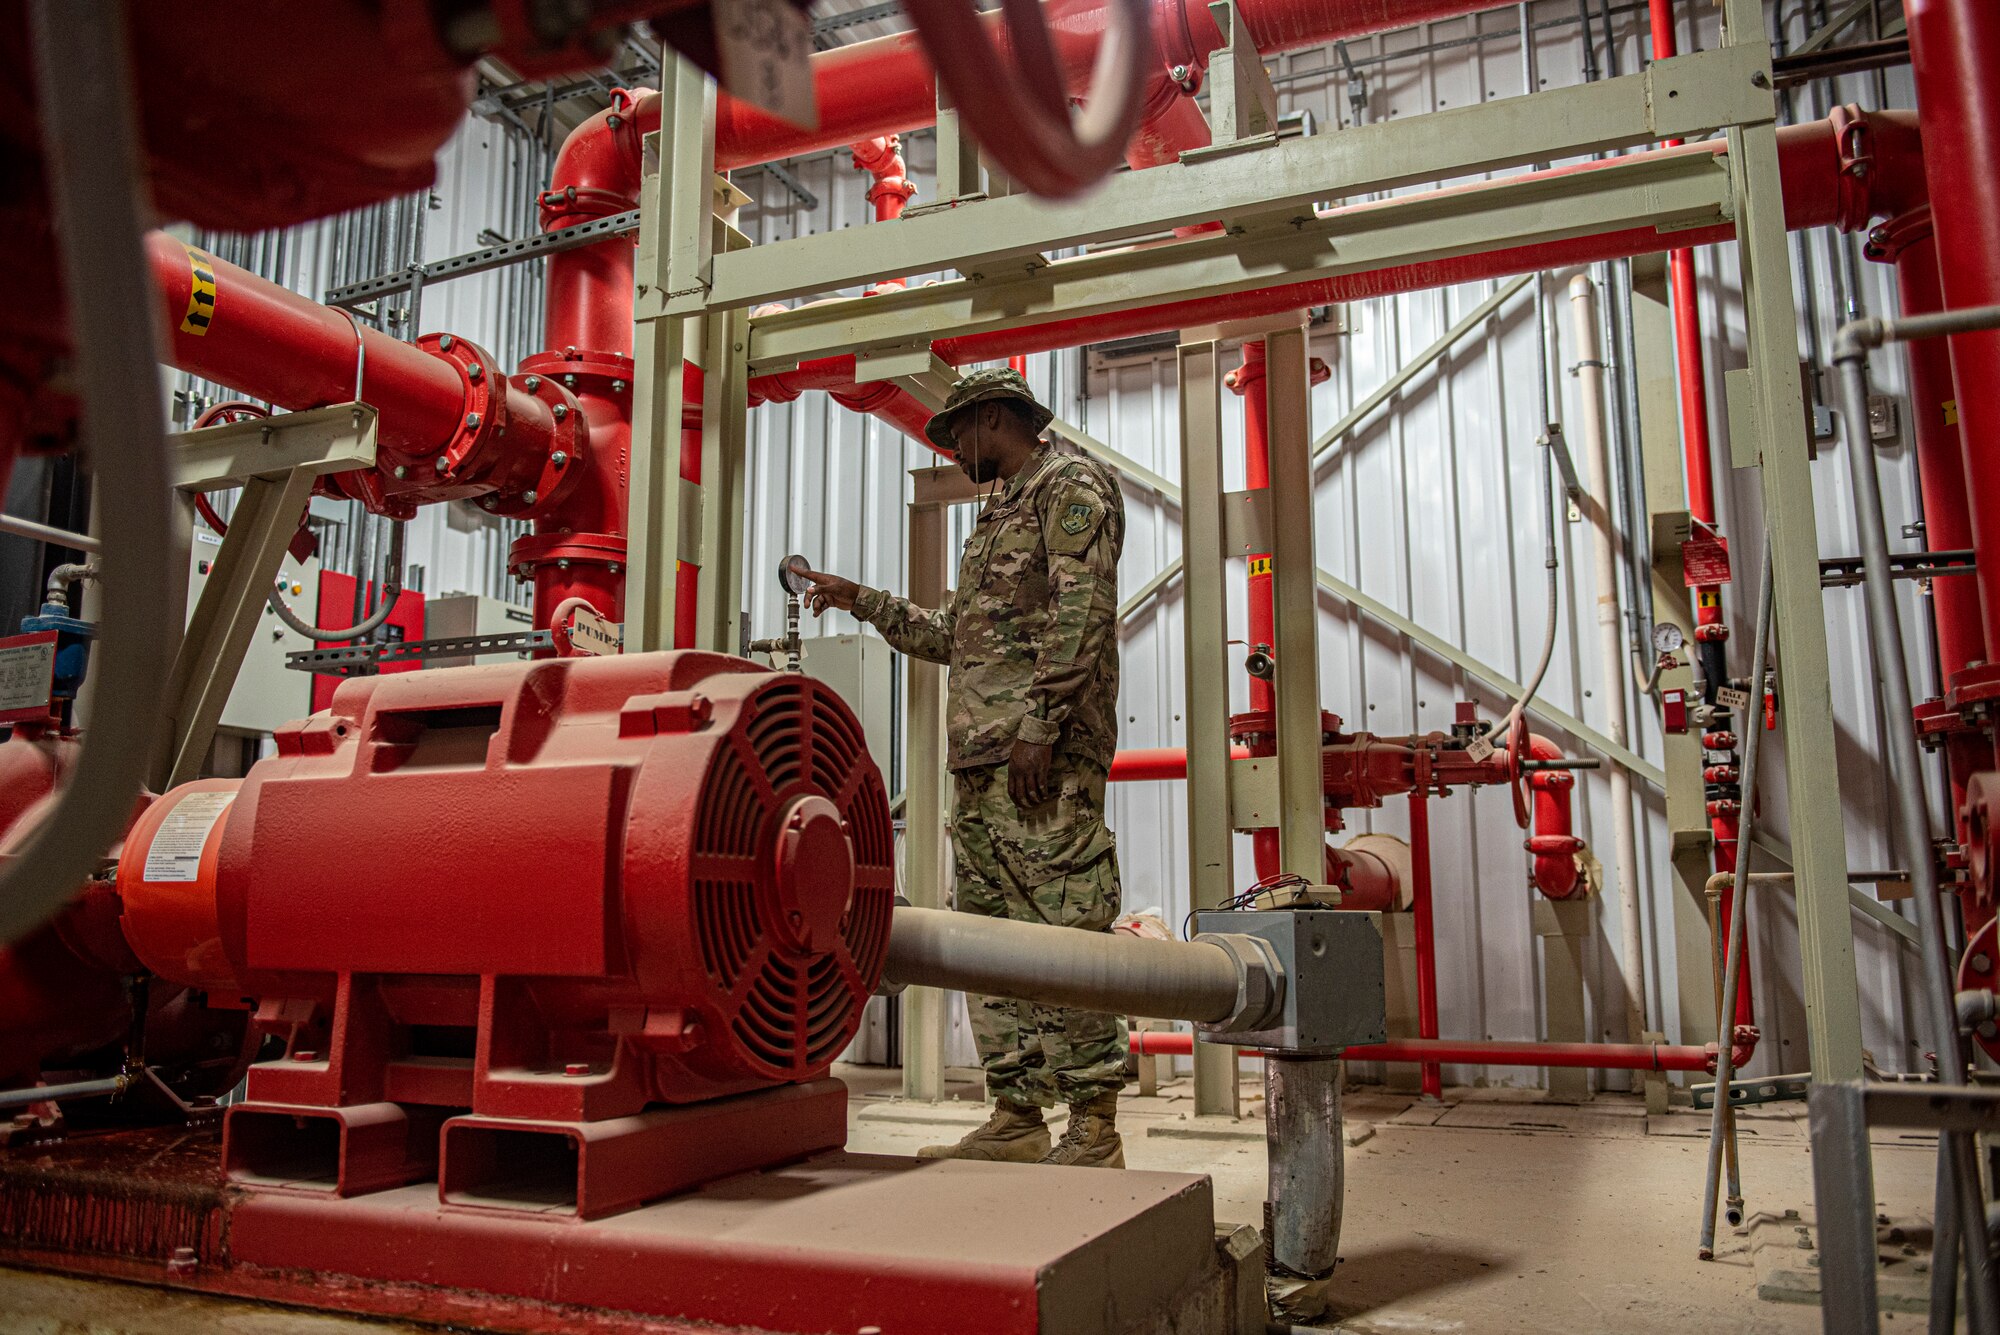 Airman 1st Class Brandon Johnson, 379th Expeditionary Civil Engineer Squadron water and fuel systems maintenance journeyman, checks the pressure gauge on a water storage tank June 16, 2021 at Al Udeid Air Base, Qatar.